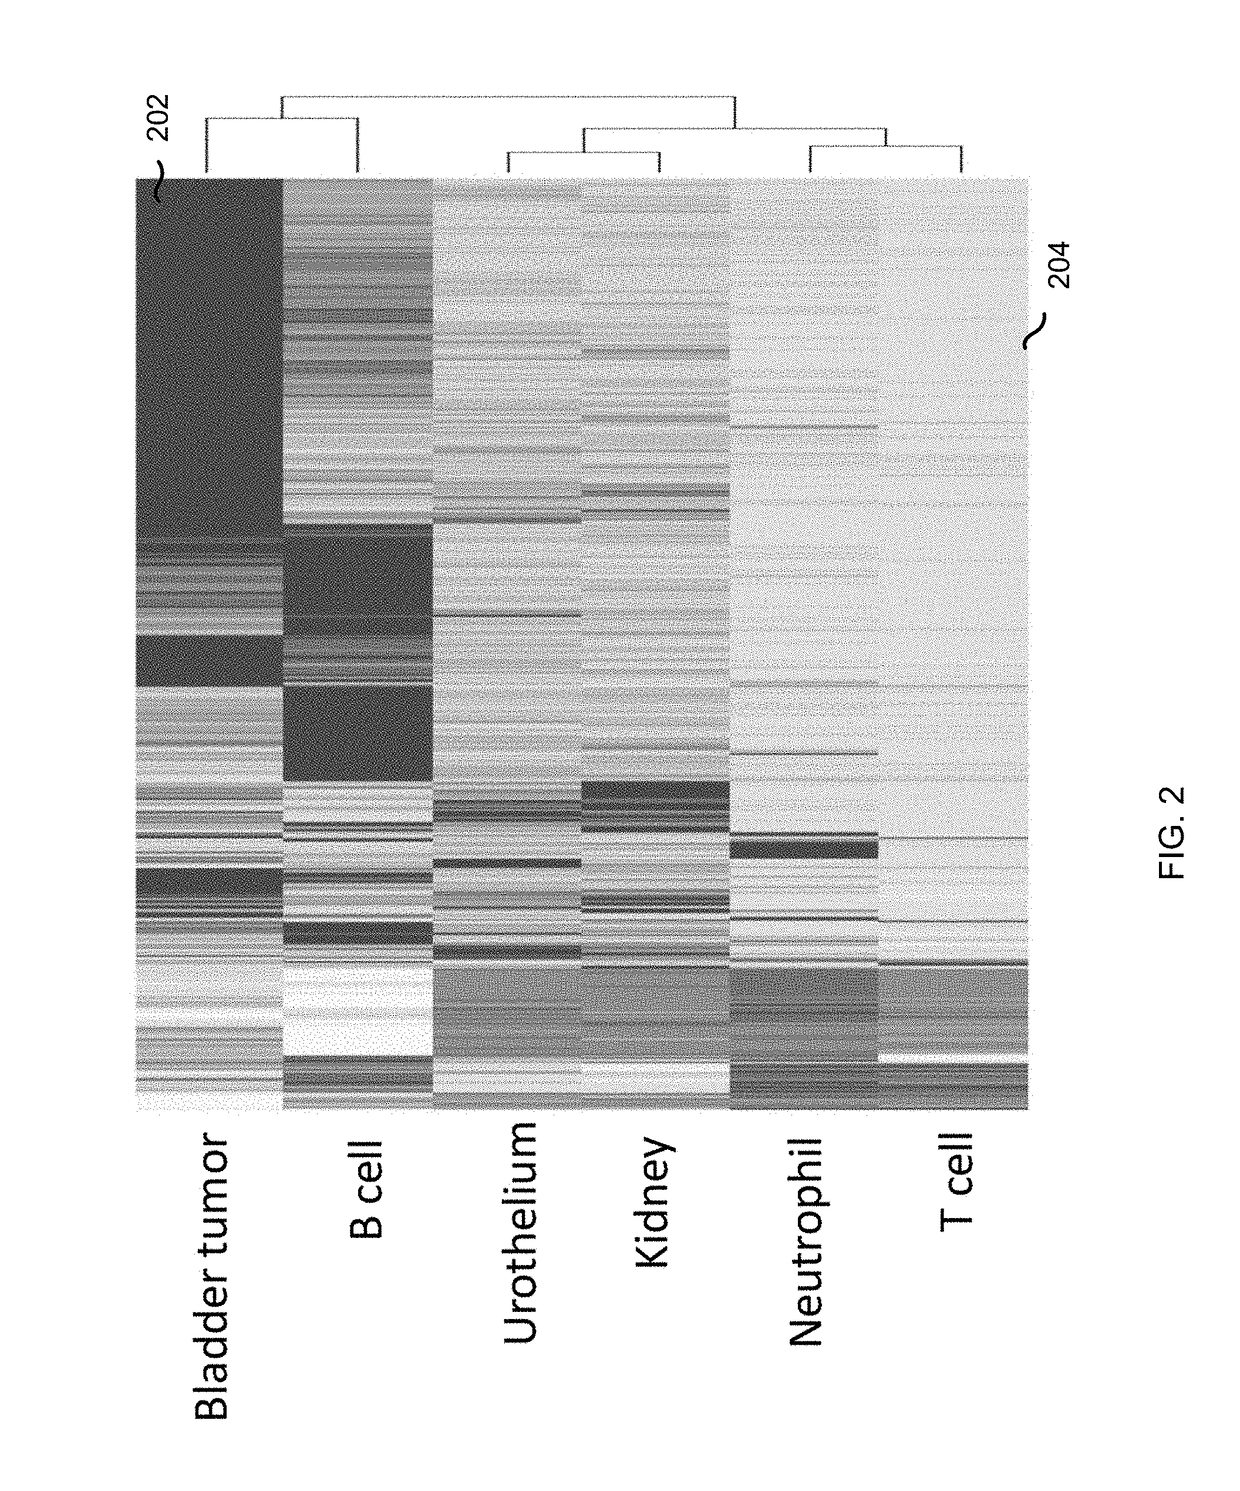 Analysis of cell-free DNA in urine and other samples